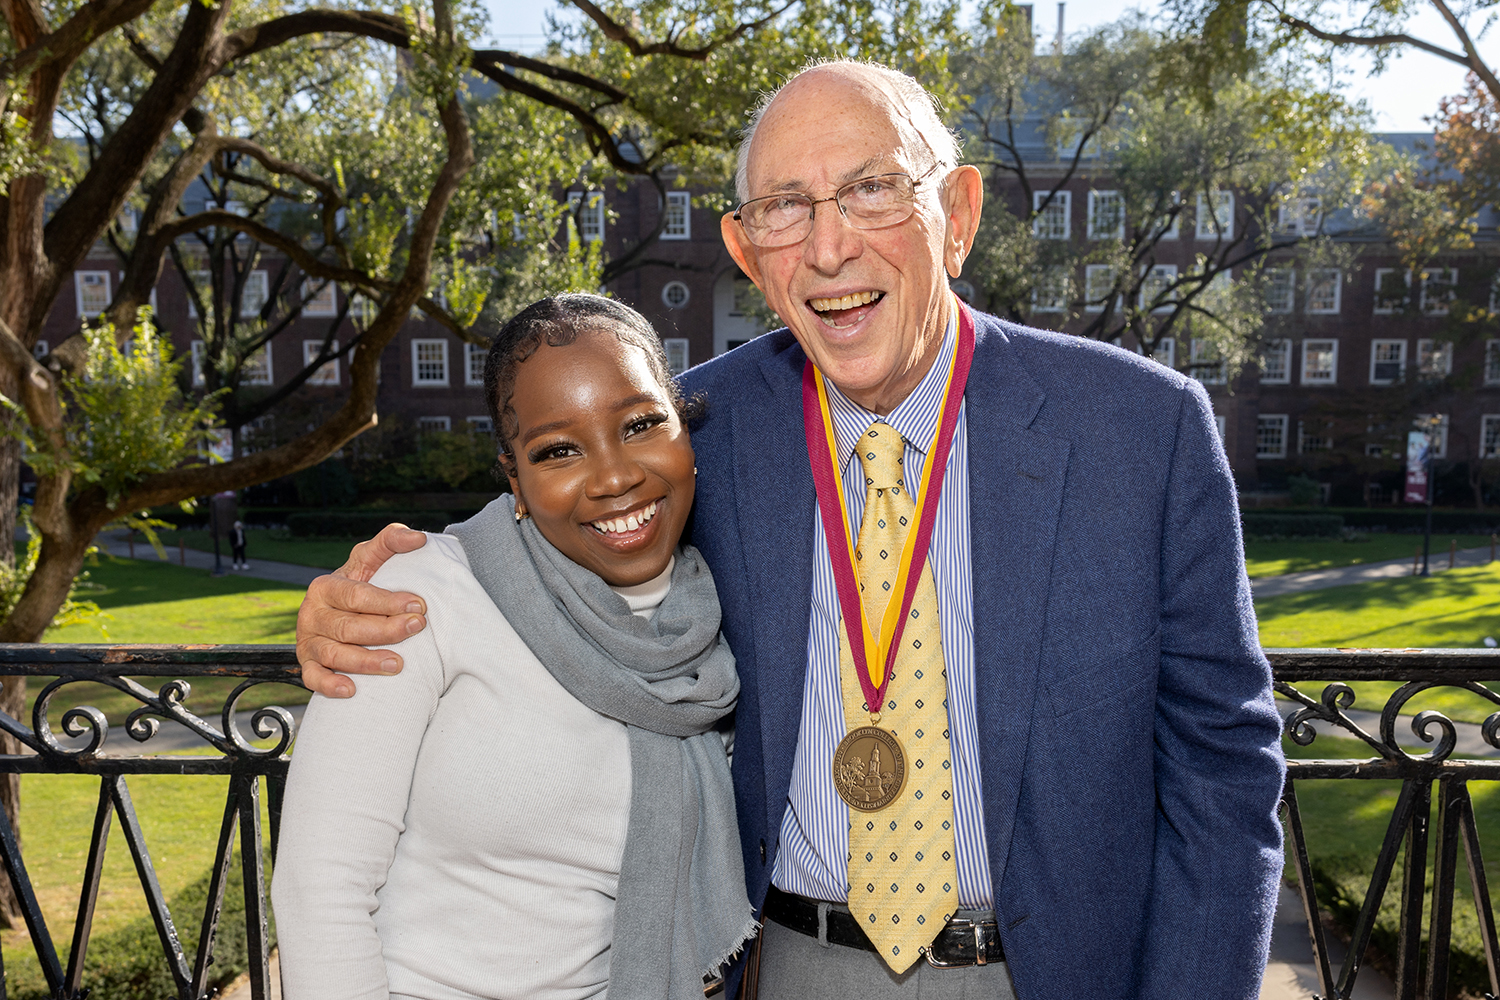 Brooklyn College Foundation trustee Irwin Federman ’56 received a presidential medal of honor from the college this fall for his long-standing support. Here, he poses with Rayshal De Riggs, a Federman Fellow through Brooklyn College’s Immigrant Student Success Office. The Federman Fellowship Program connects immigrant and first-generation students to mentors at the college.